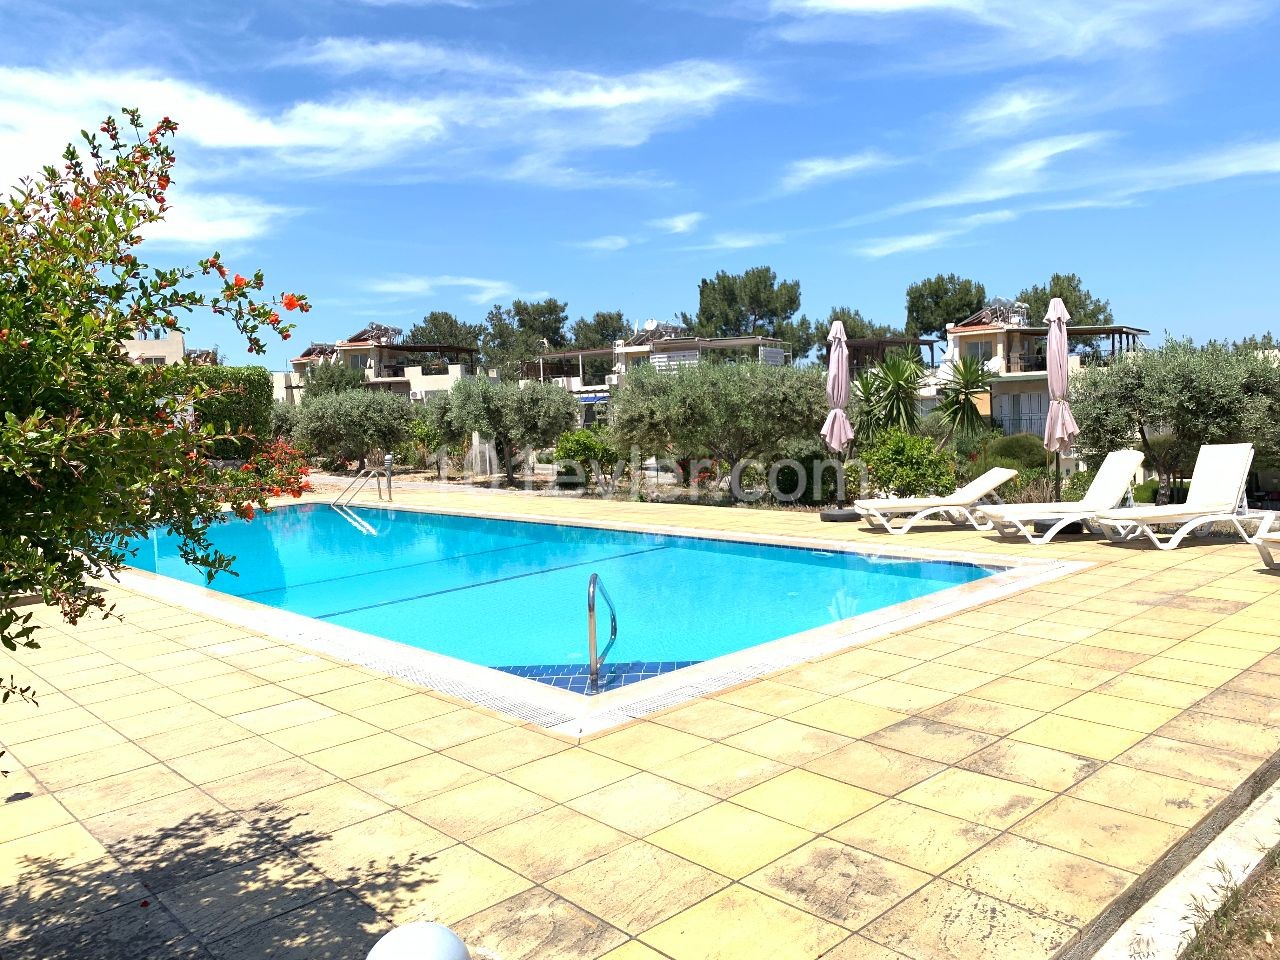 2+1 APARTMENTS FOR SALE IN KYRENIA EDREMIT REGION OF CYPRUS ** 